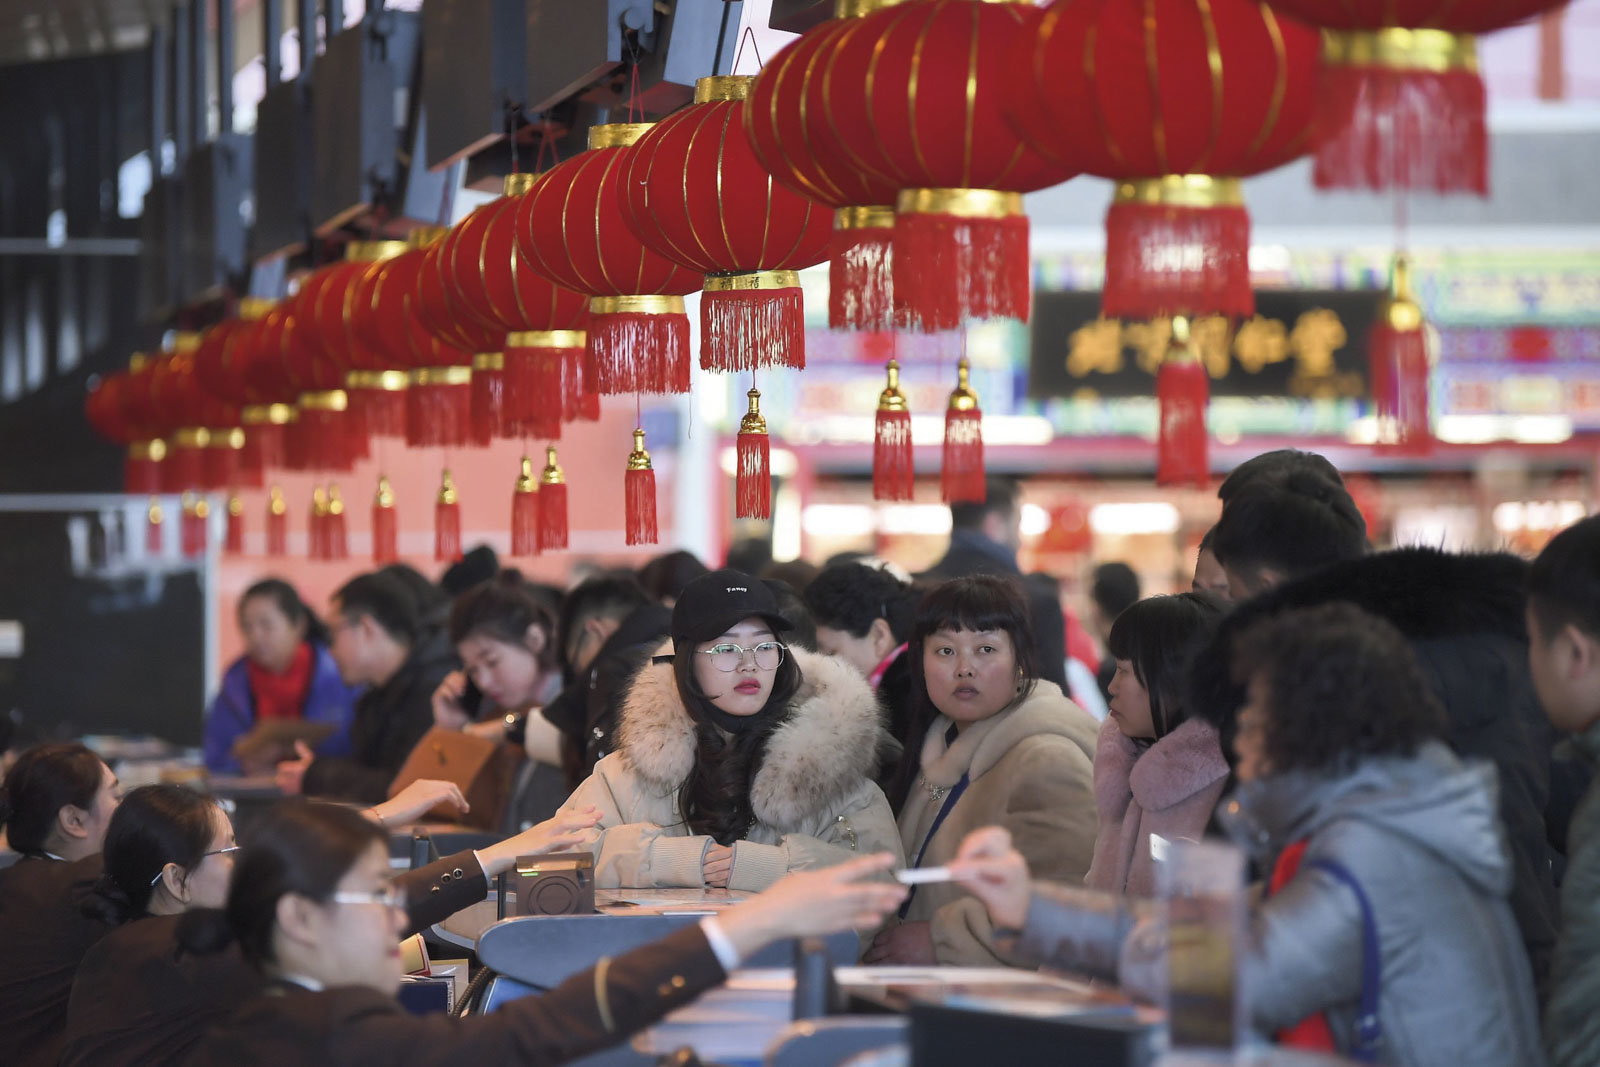 CBC-People celebrate Little New Year at Shenyang Xiantao International Airport, Chinese New Year